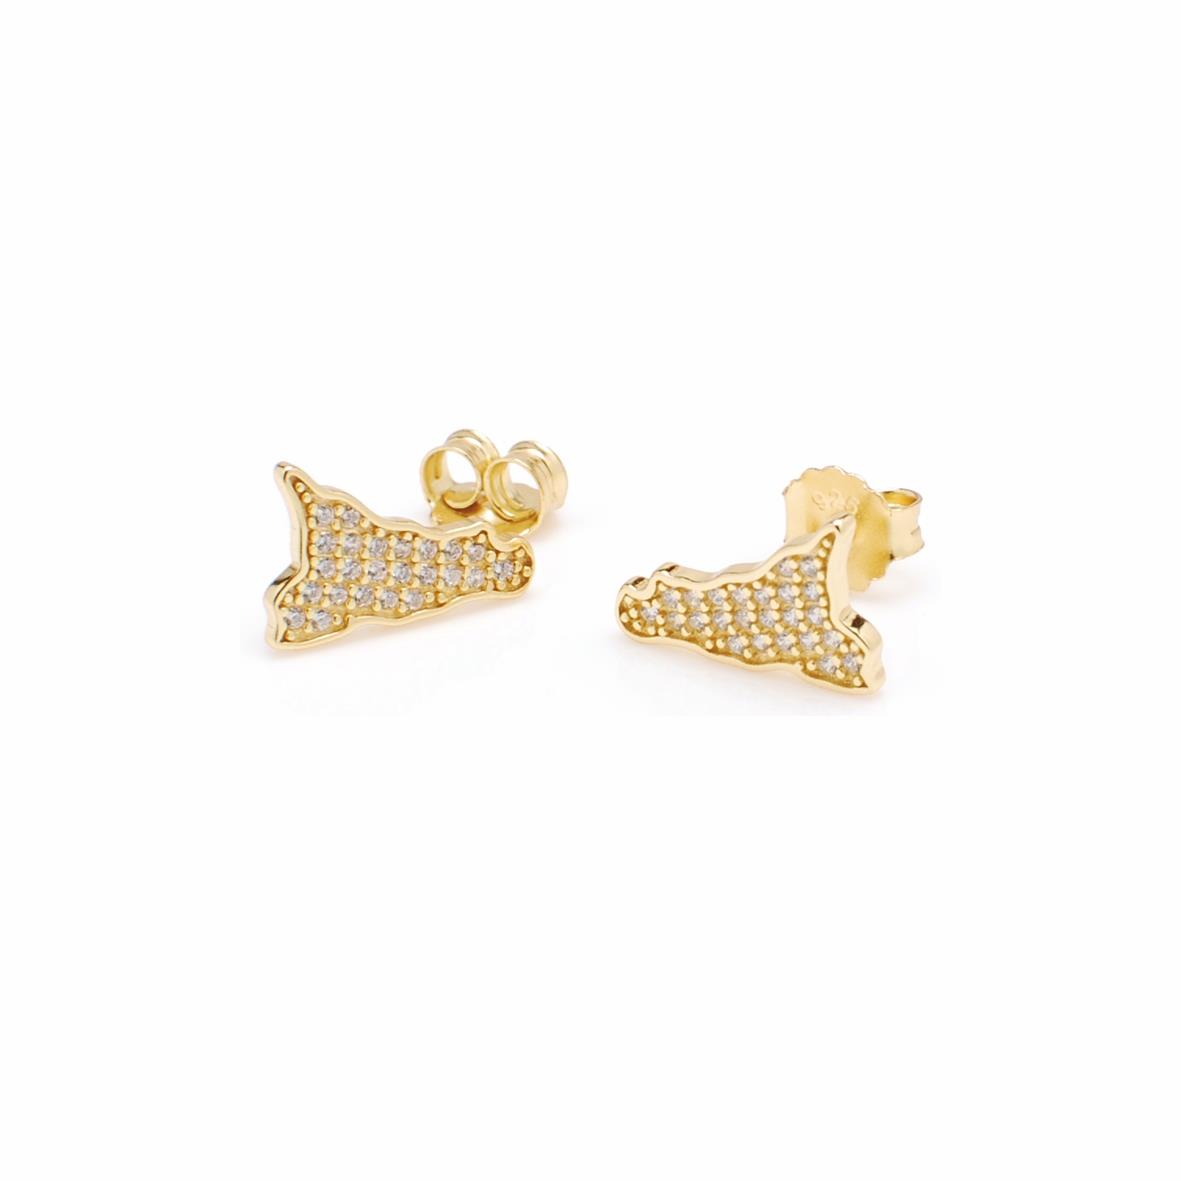 Golden silver lobe earrings with the symbol of Sicily and white zircons - MY SICILY